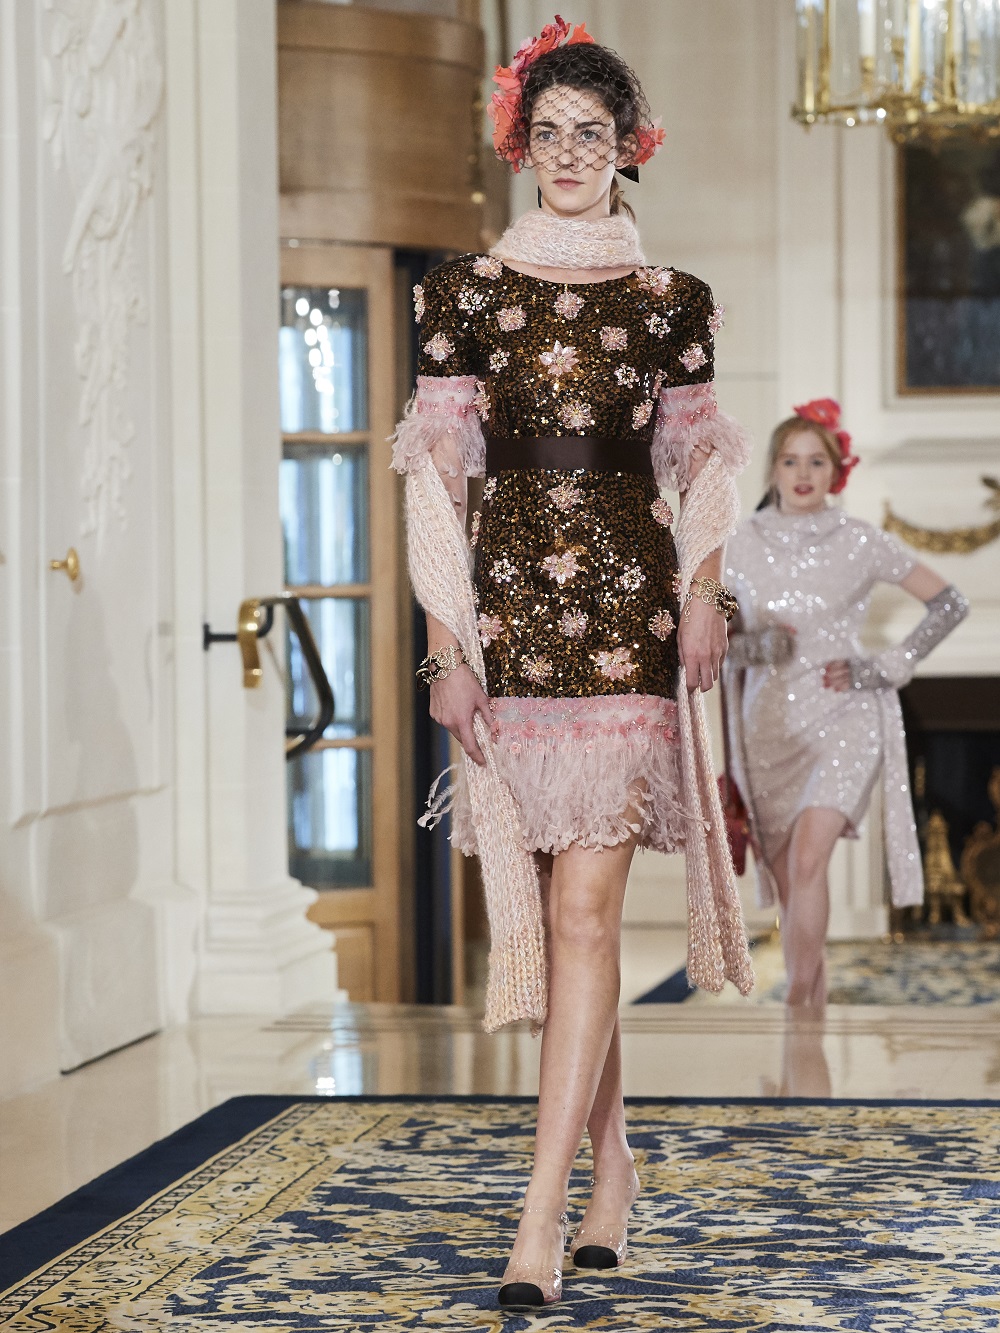 A model wears a dress with sequins and a Chanel fascinator on the runway at Chanel's pre-fall 2017 collection at The Ritz